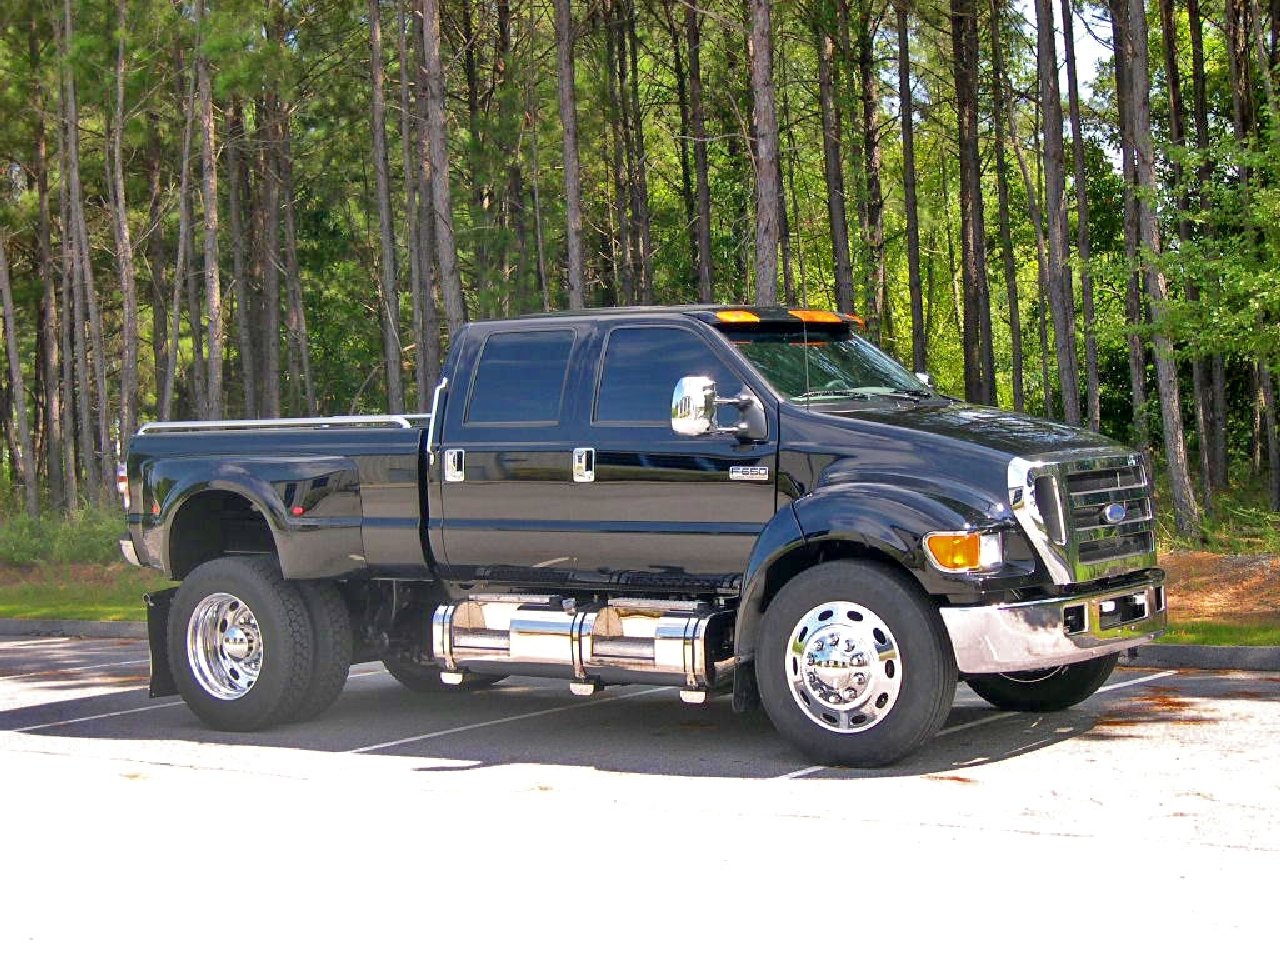 Ford F 650 Image Id 362519 Image Abyss